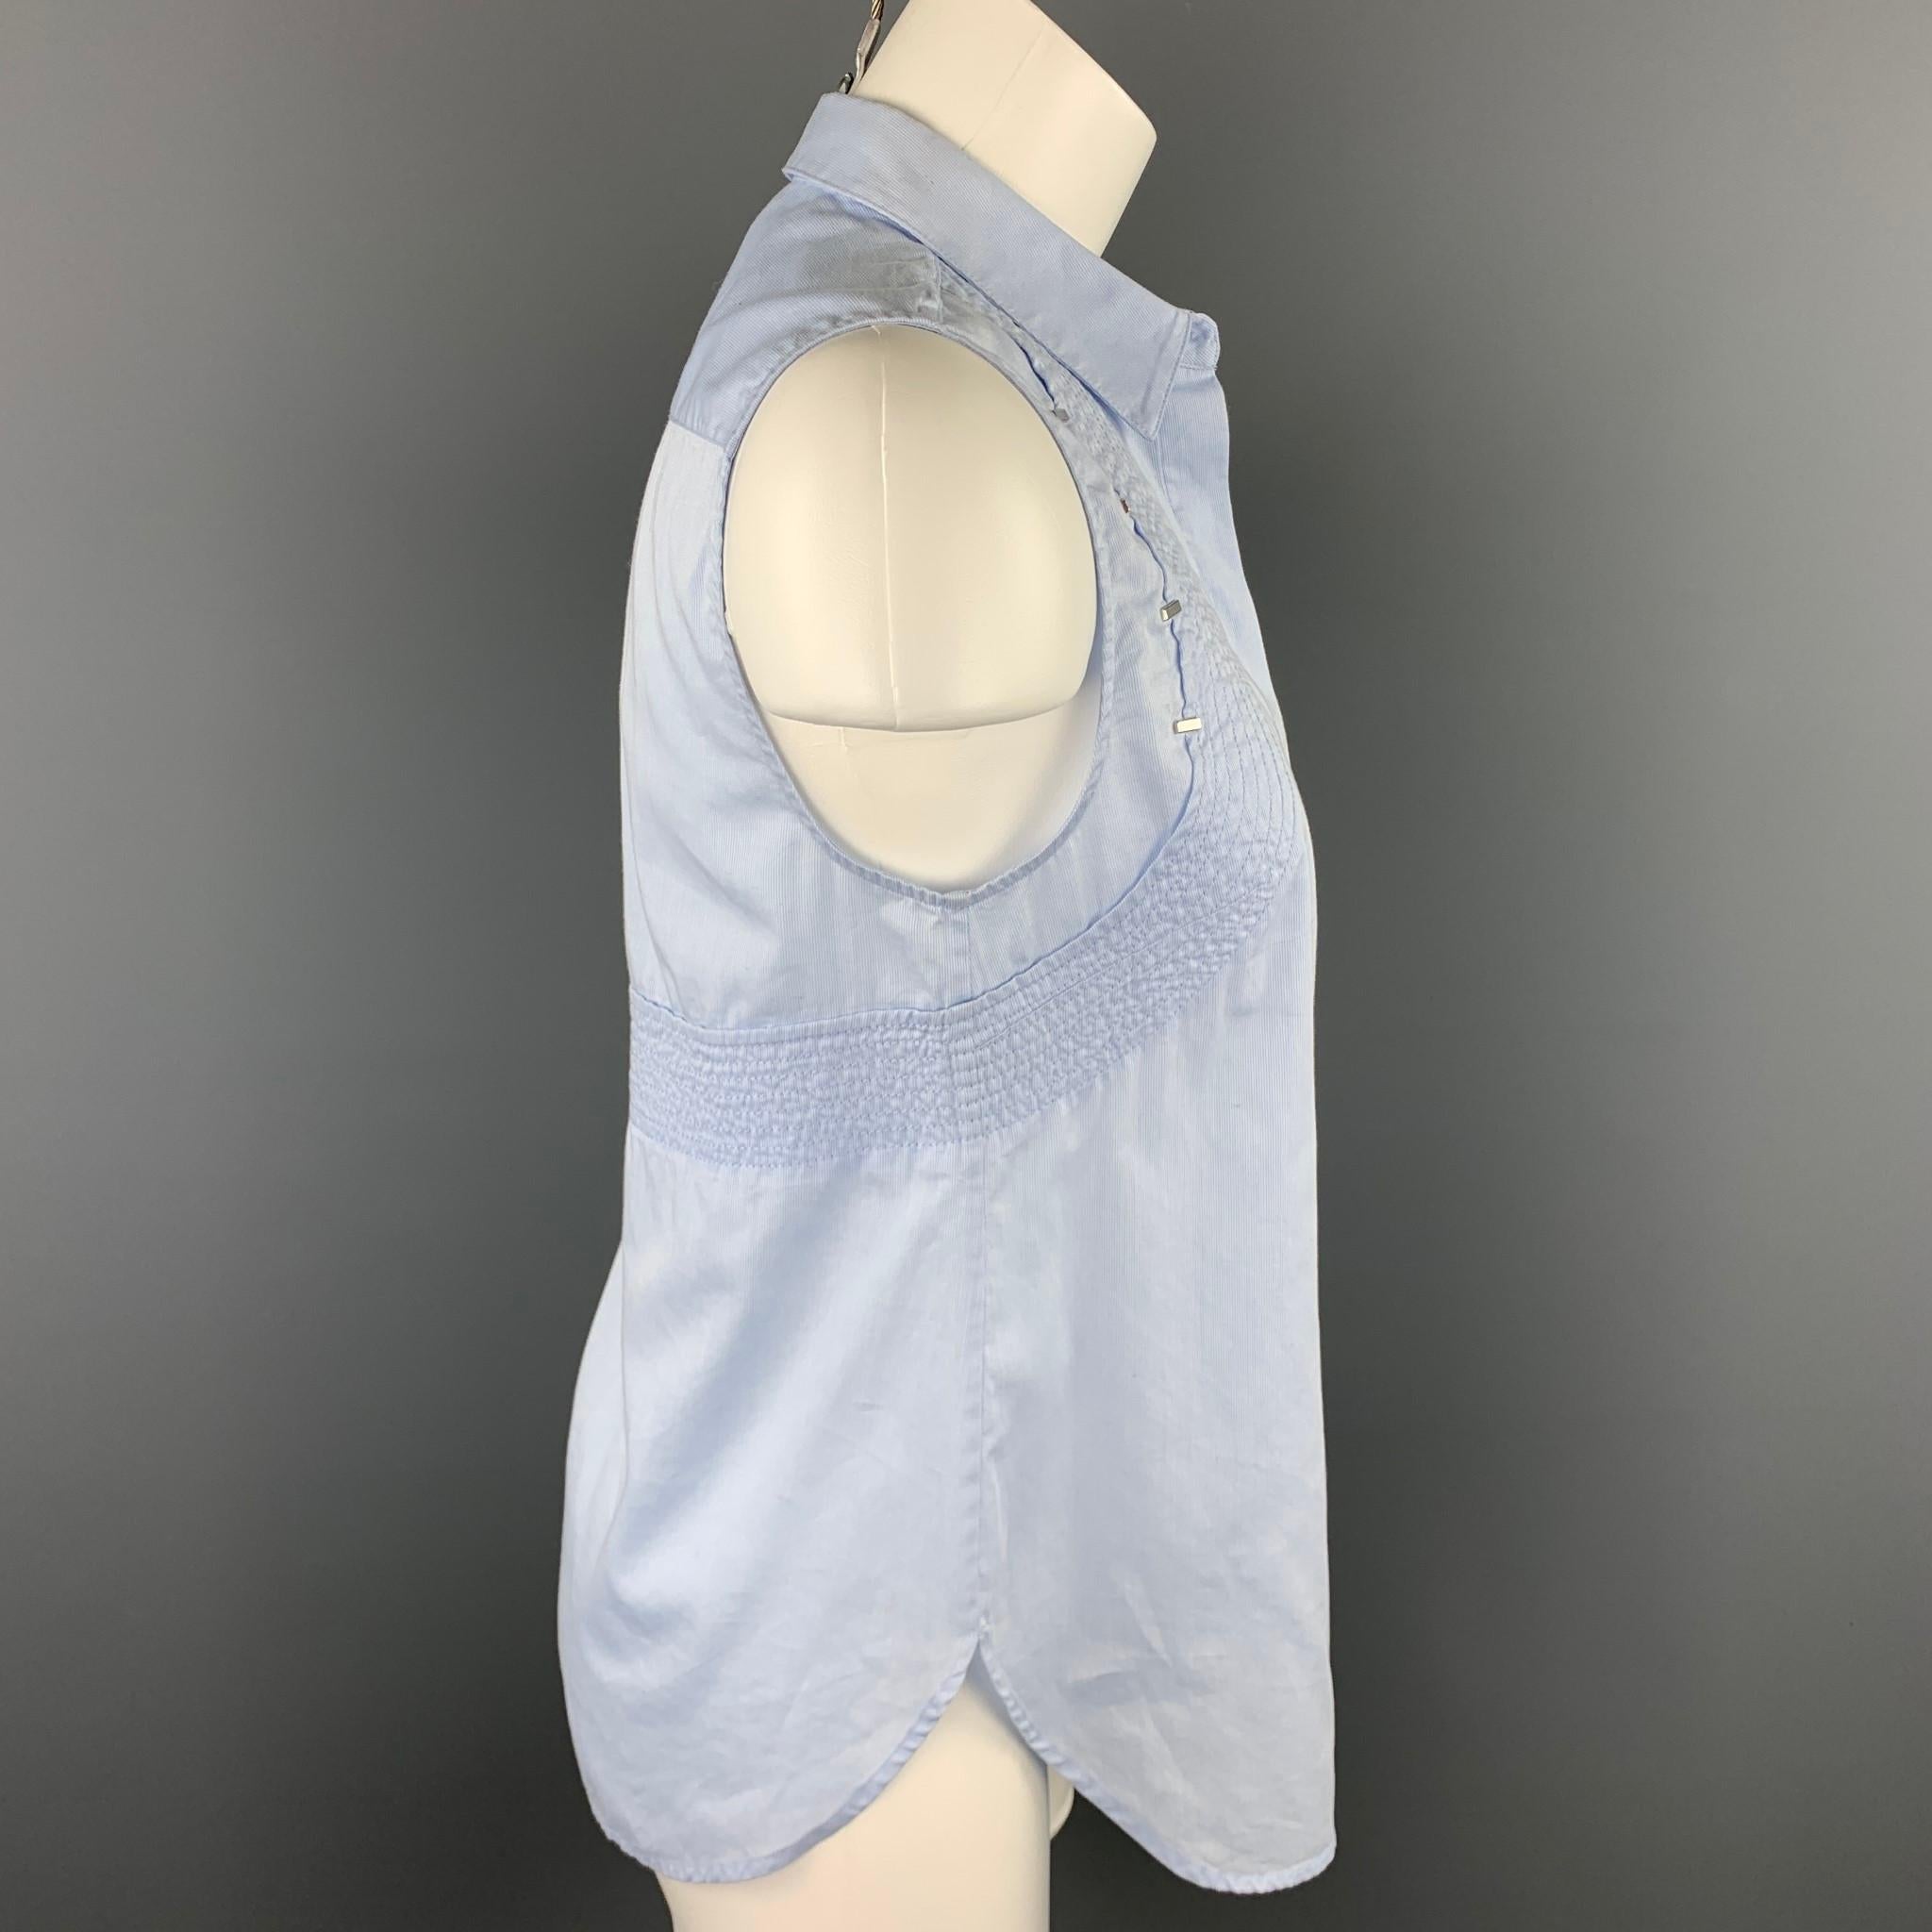 3.1 PHILLIP LIM blouse comes in a light blue striped poplin cotton featuring top stitching, silver tone details, spread collar, and a hidden button closure.

Very Good Pre-Owned Condition.
Marked: 2

Measurements:

Shoulder: 13 in. 
Bust: 34 in.